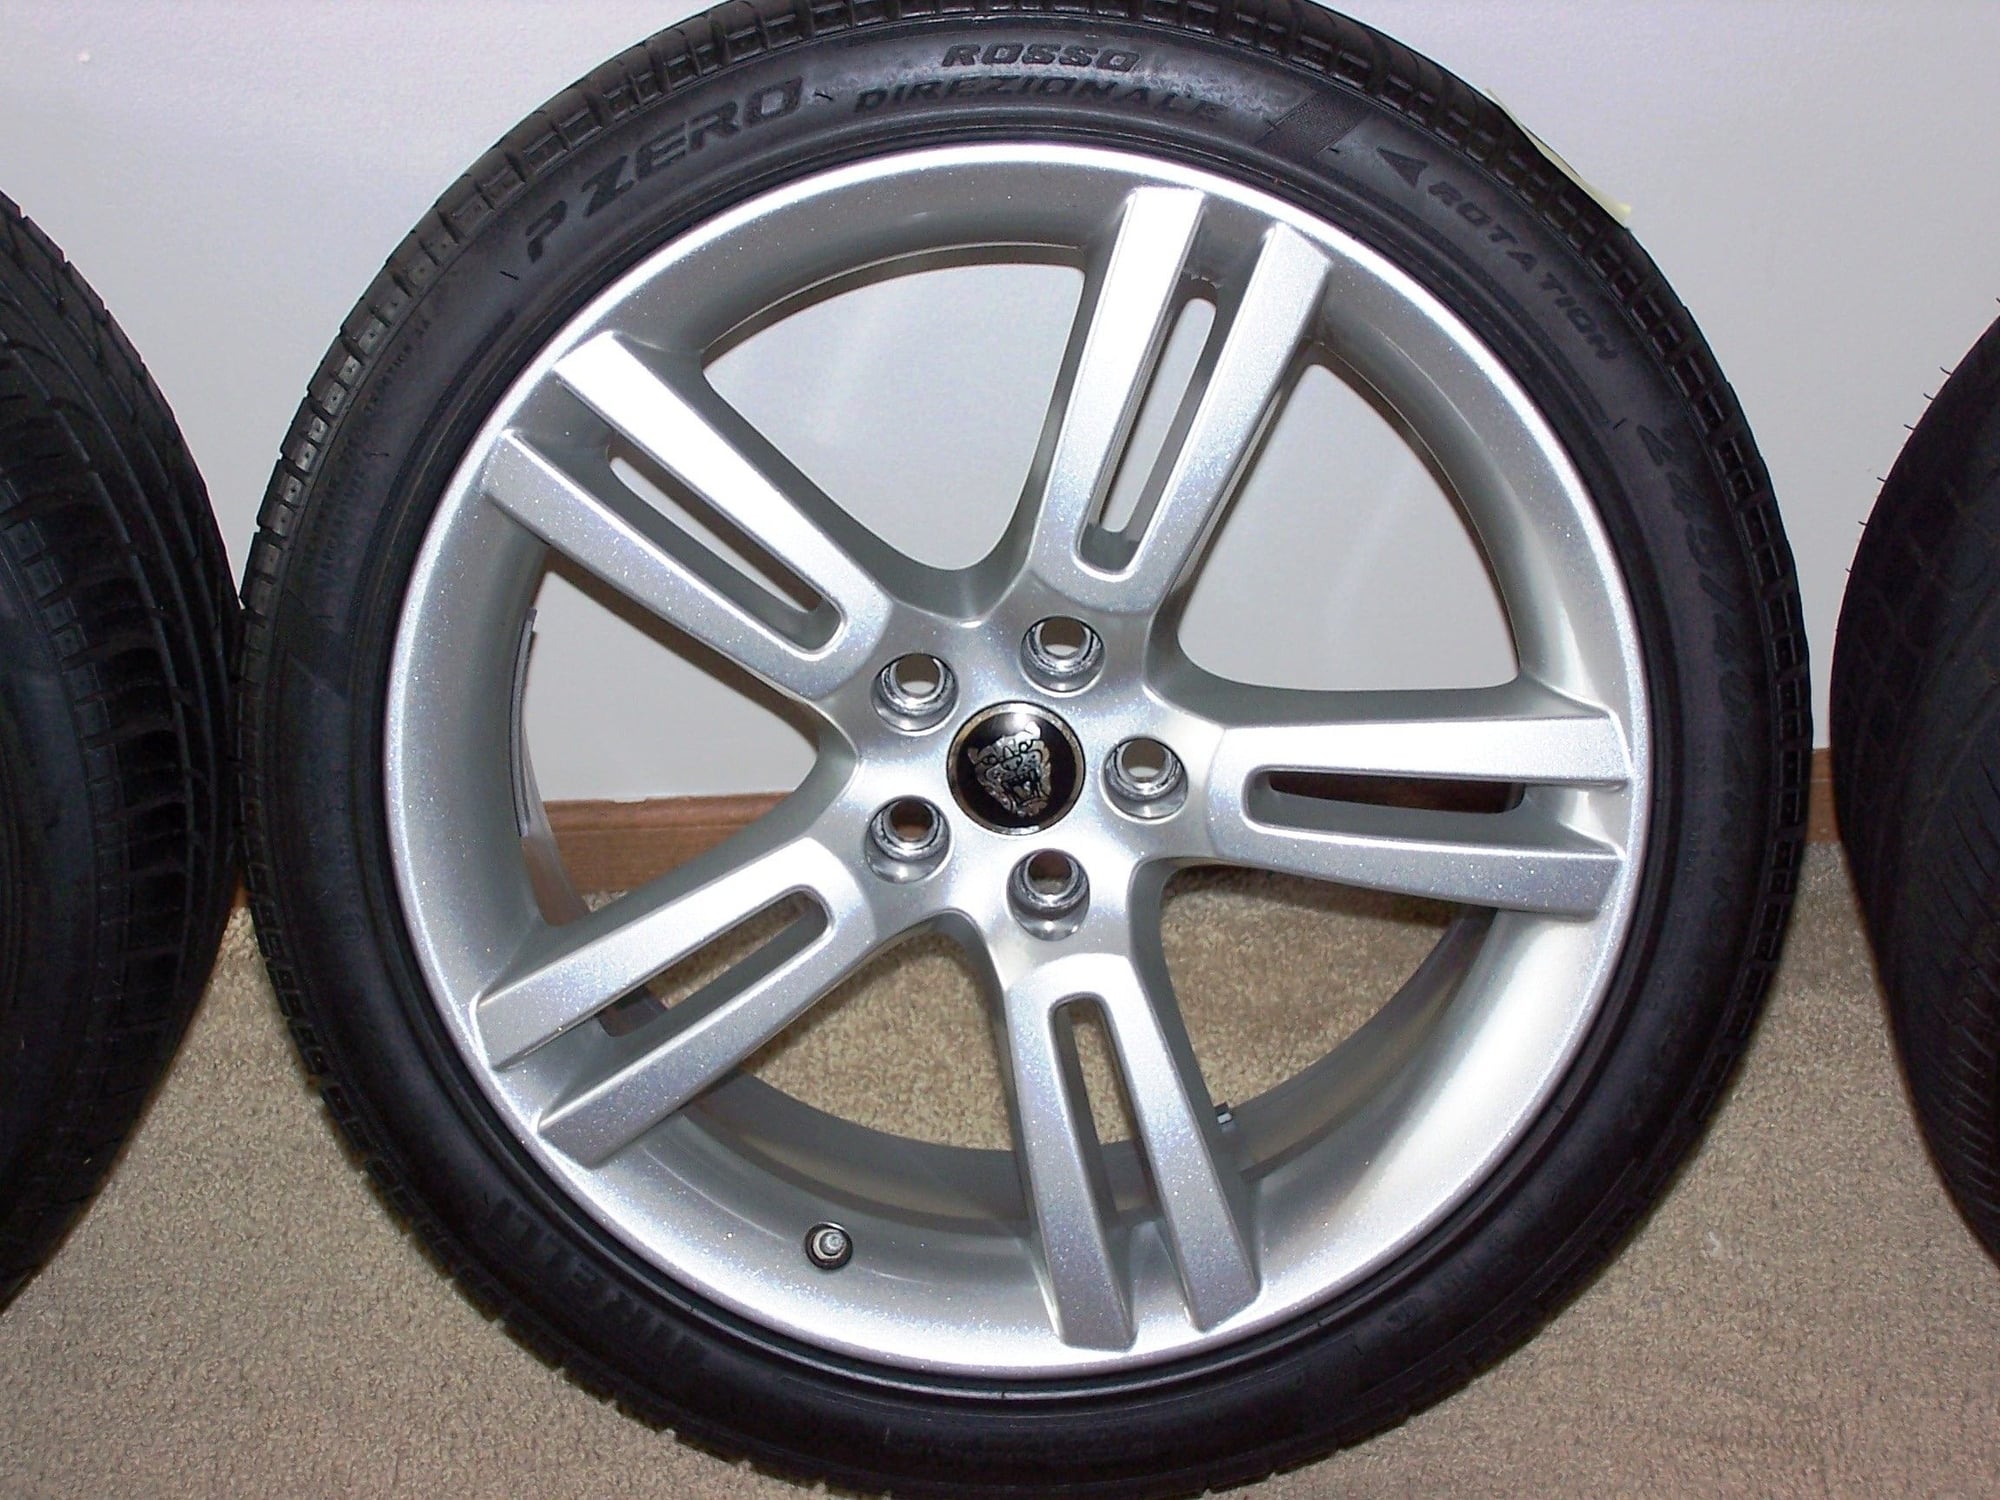 Wheels and Tires/Axles - Jupiter 19" wheels and Pirelli tires like new for Jaguar XKR 07 or newer. - Used - 2007 to 2010 Jaguar All Models - Naperville, IL 60563, United States